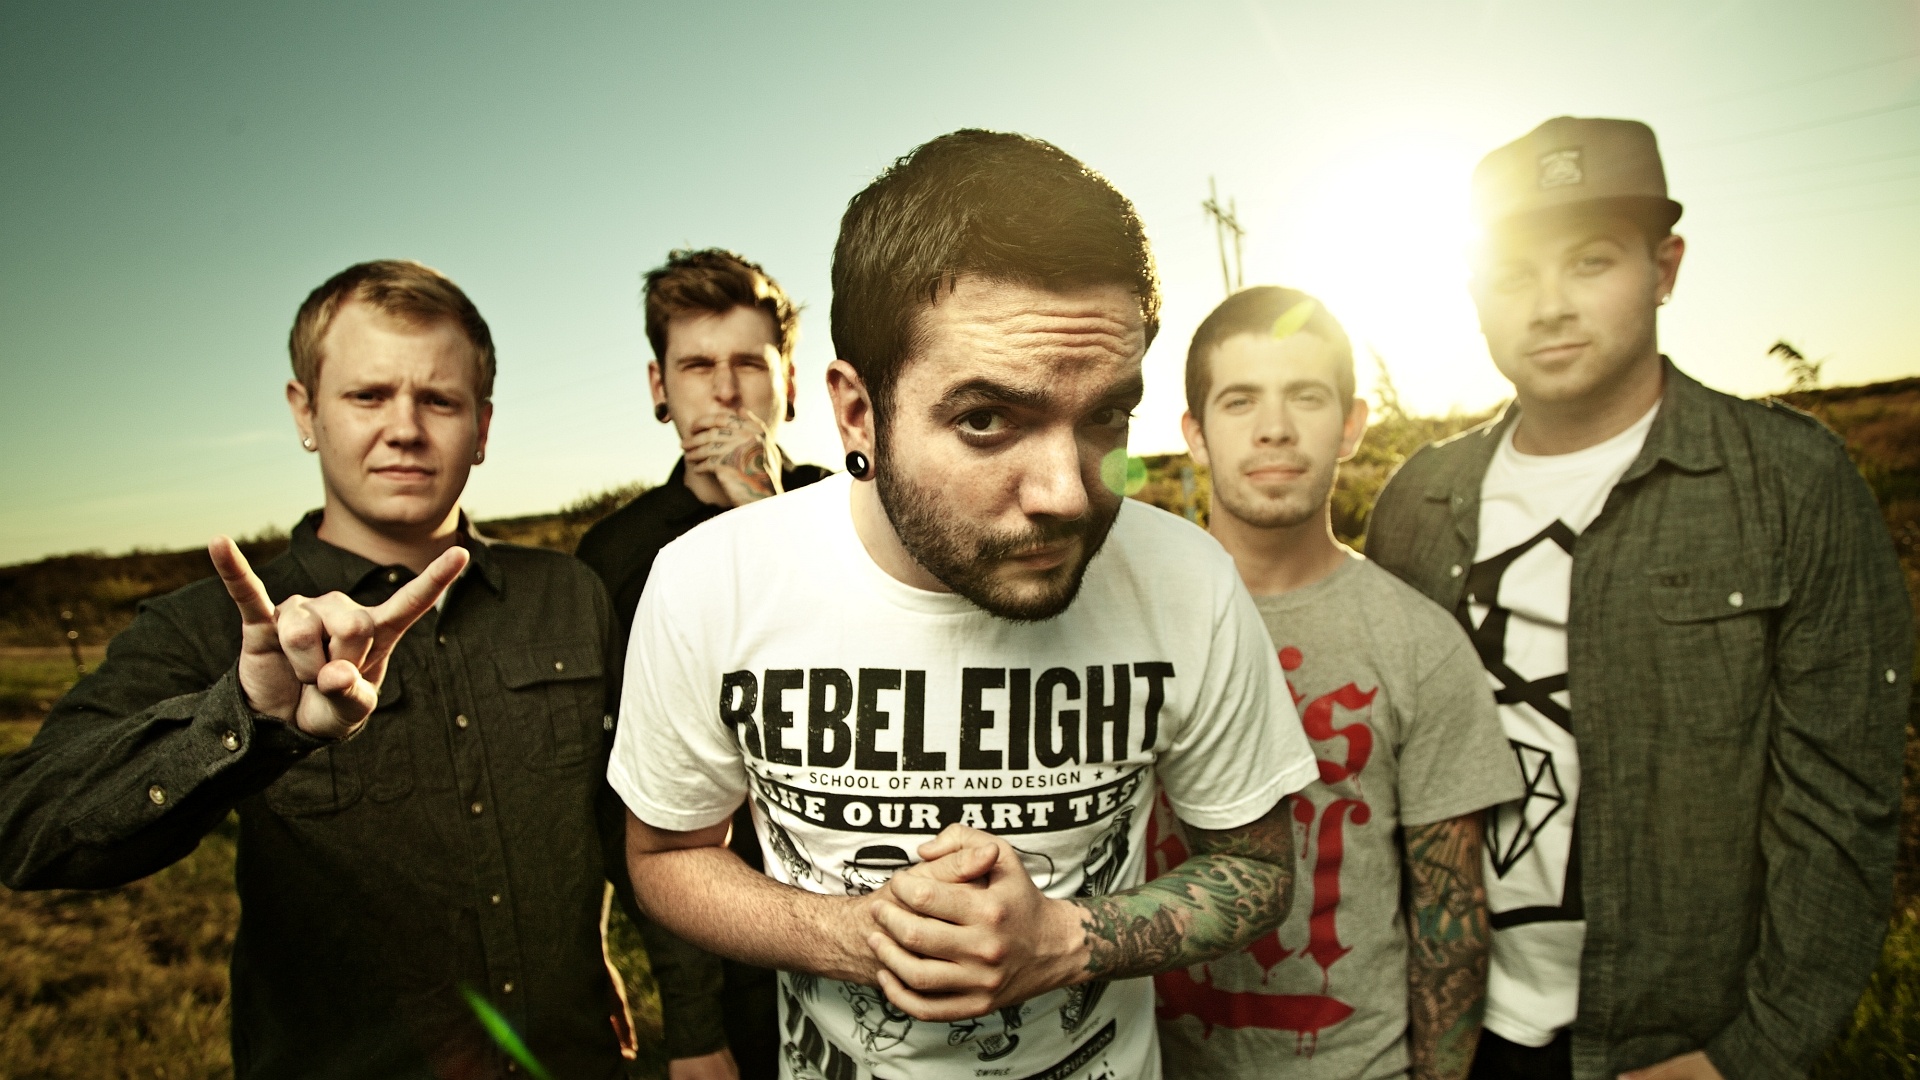 A Day to Remember, HD wallpapers, Rock music, Band, 1920x1080 Full HD Desktop